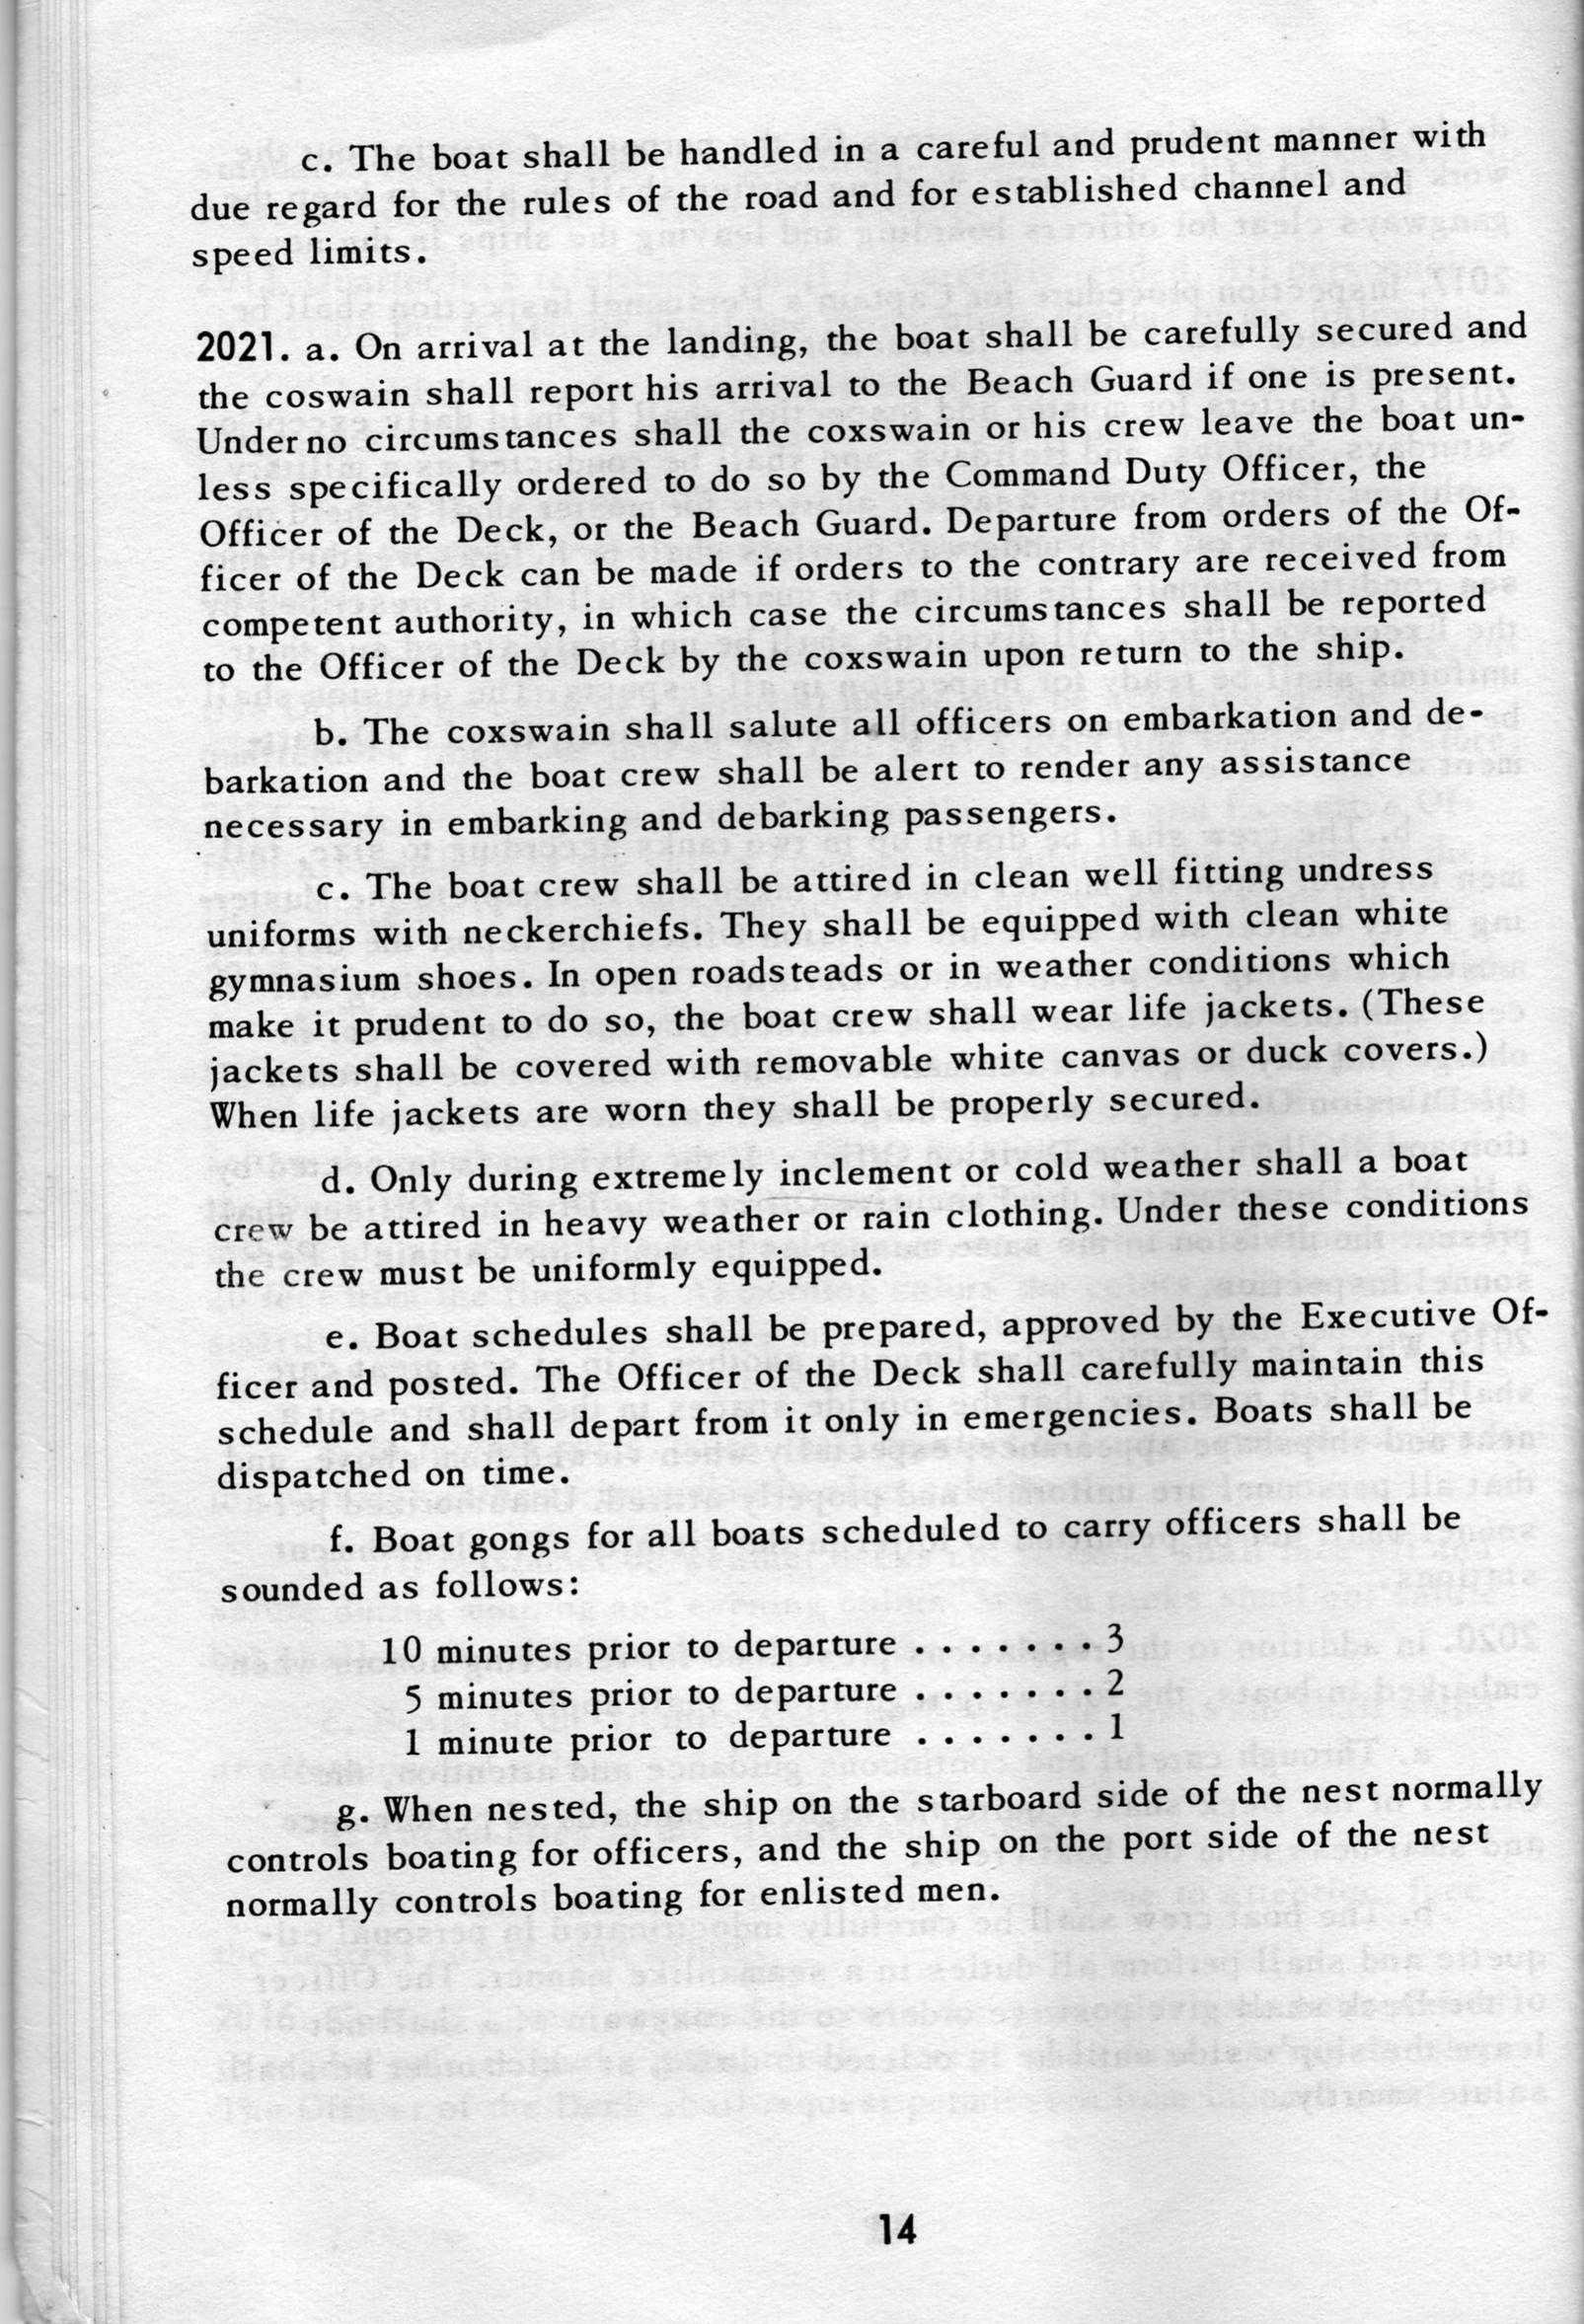 Navy Regulations for the Boat Coxswain and Operations of the Boat